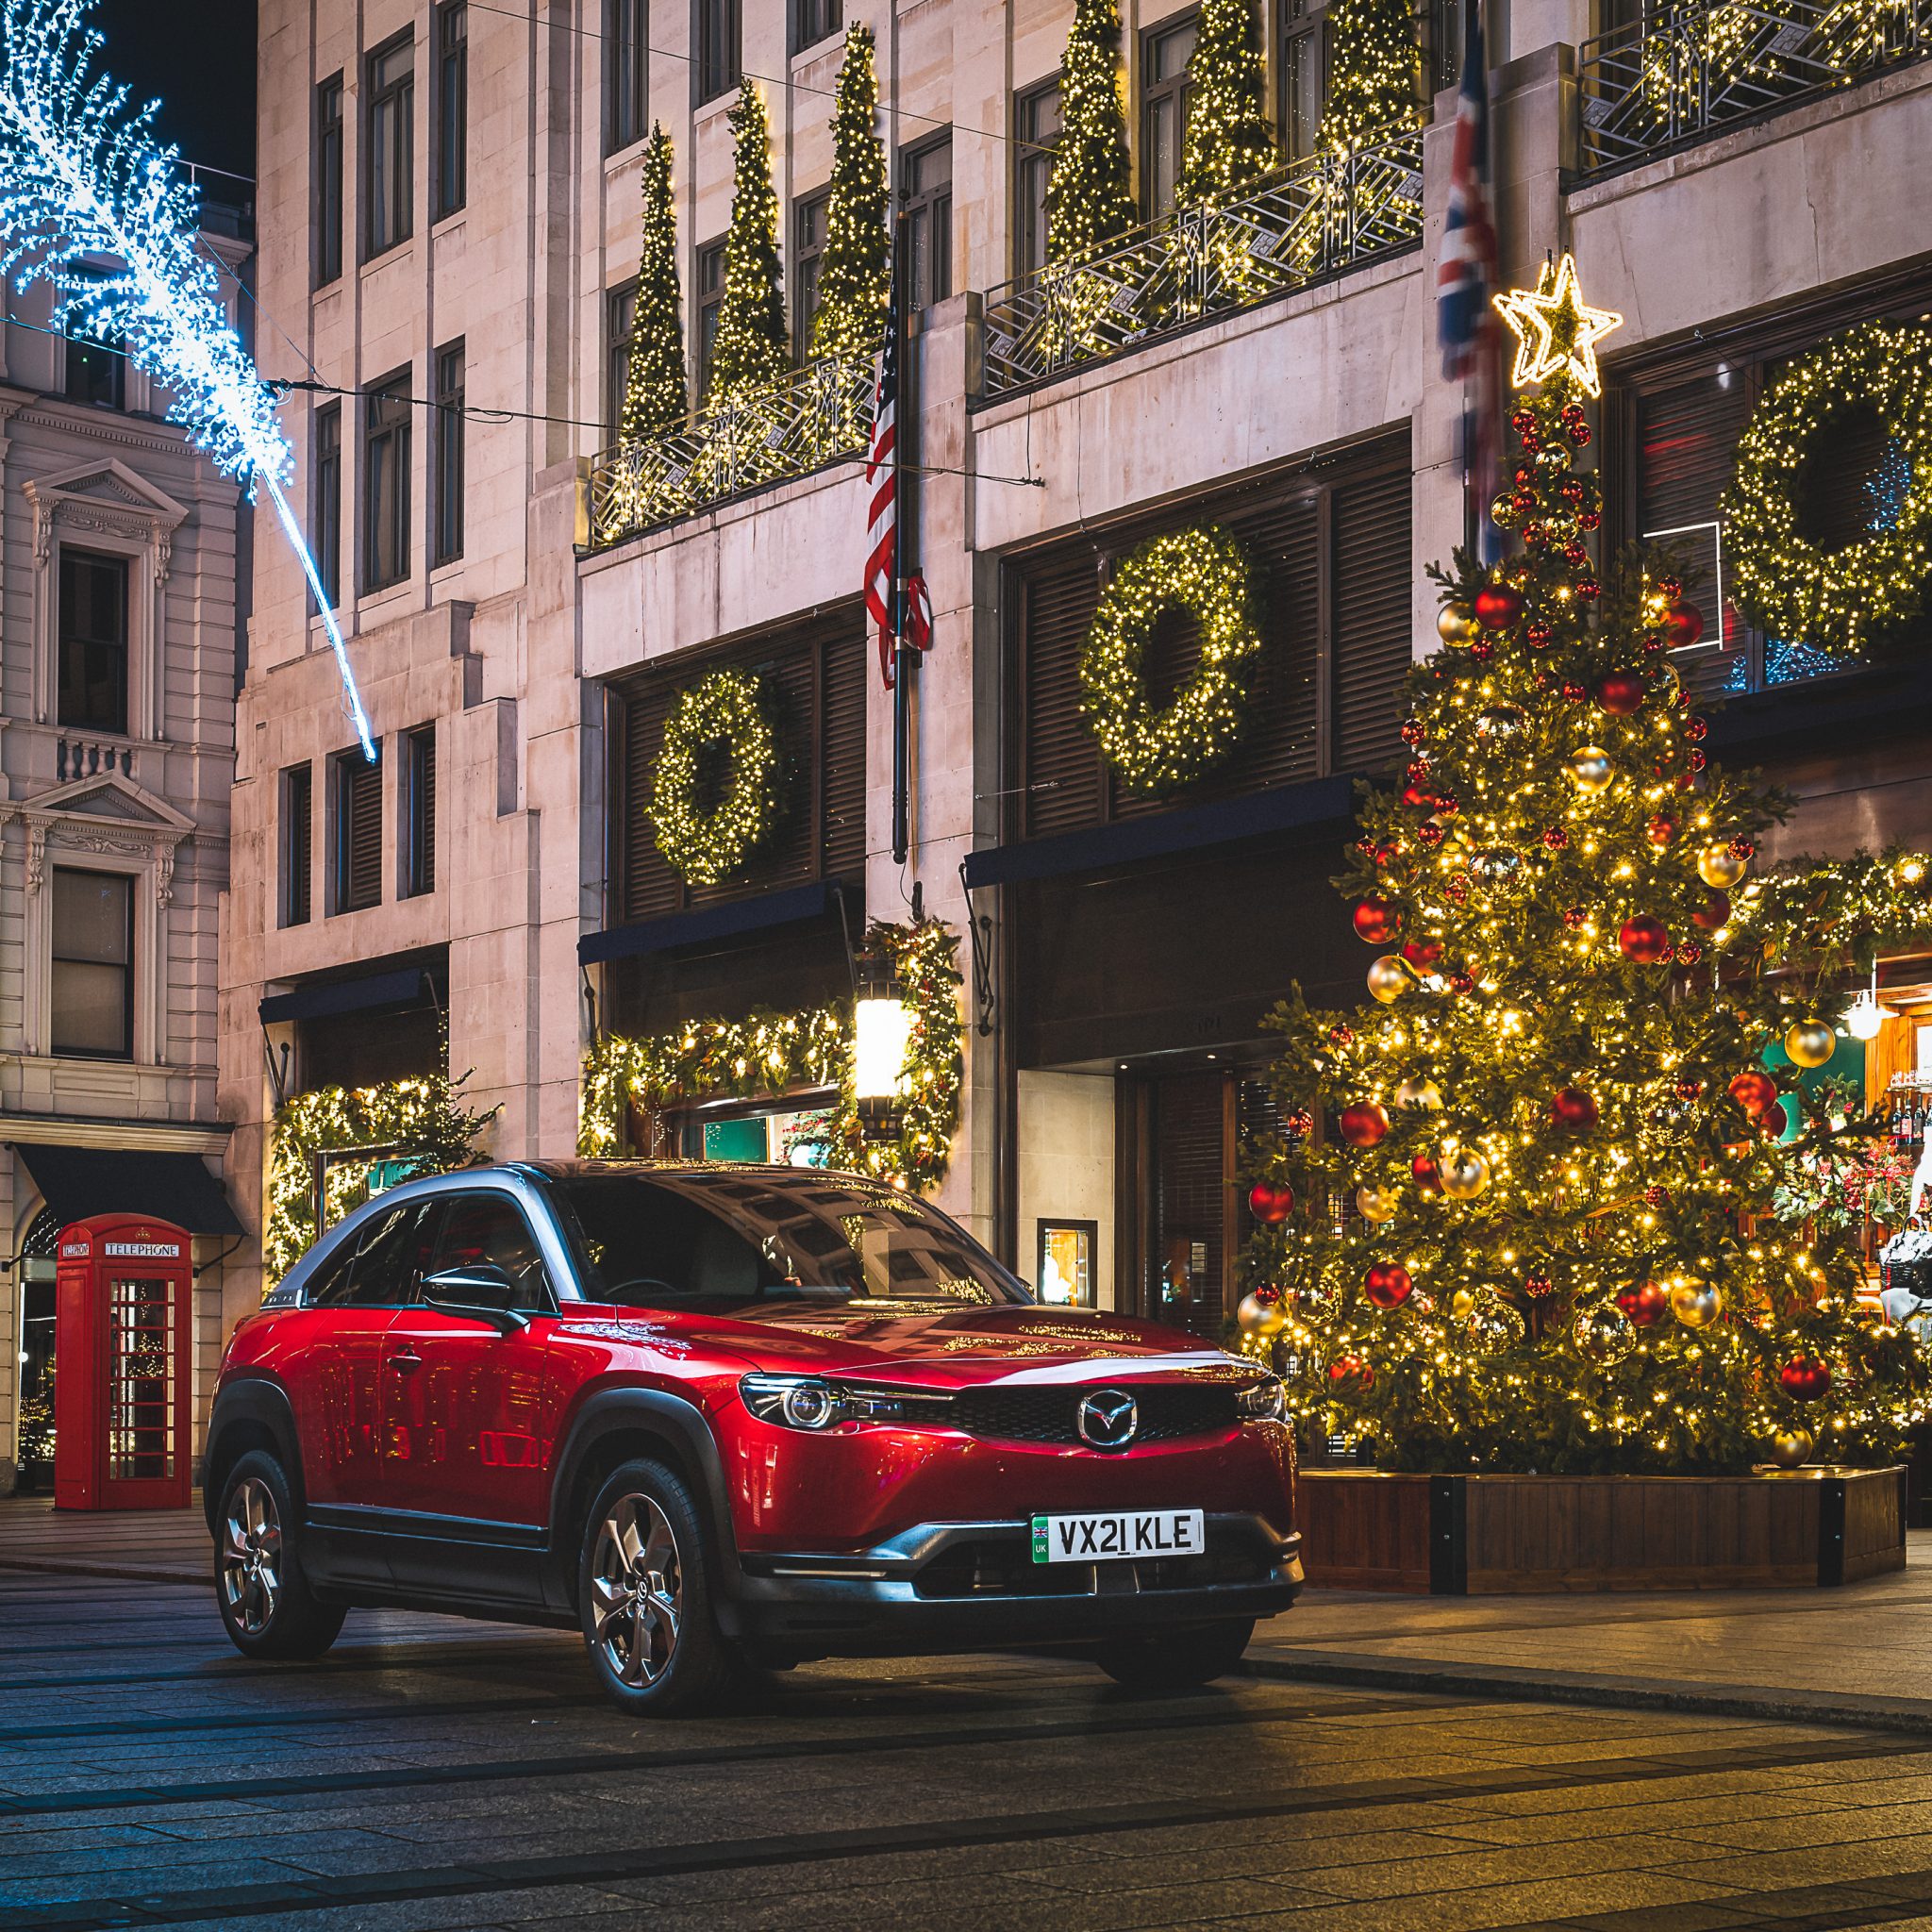 Merry Christmas and a Happy New Year from the Mazda UK Press Office